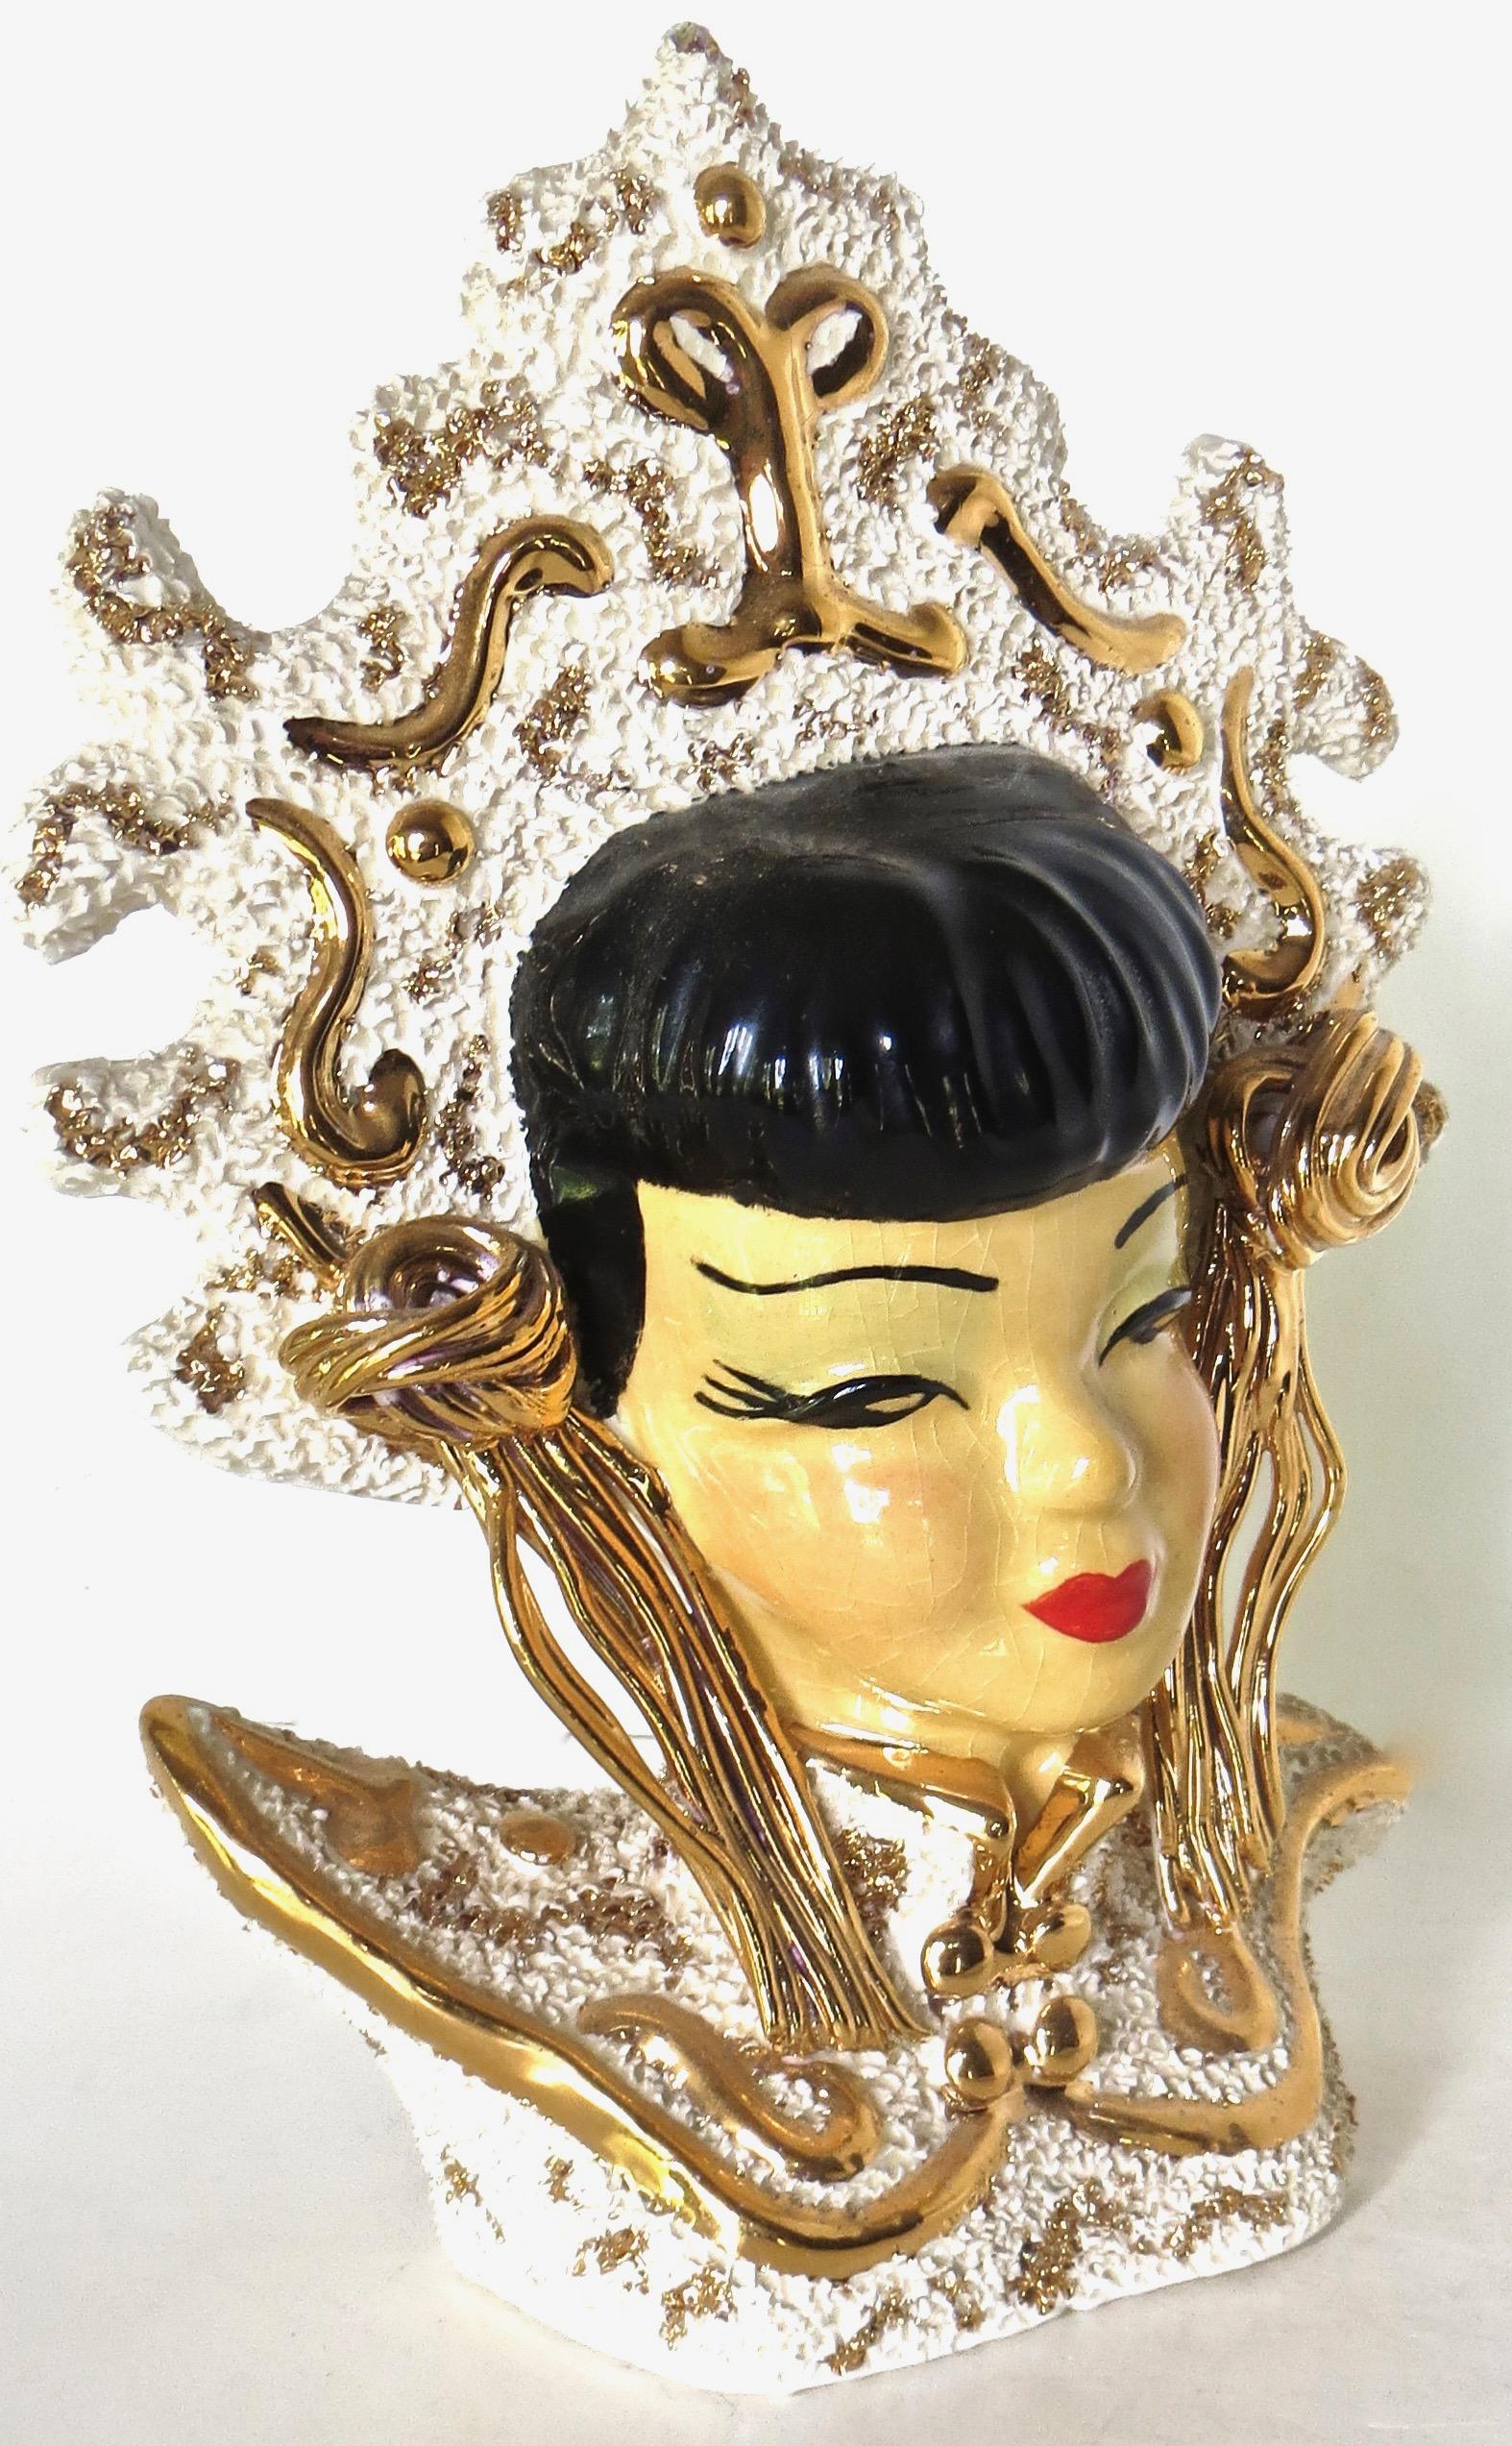 Hard to find and much sought after head vase; manufactured by the Tacoma Pottery Company (U.S.A.), circa late 1950's; depicts Japanese young lady dressed in formal traditional Japanese royal attire, with elaborate headdress and striking 